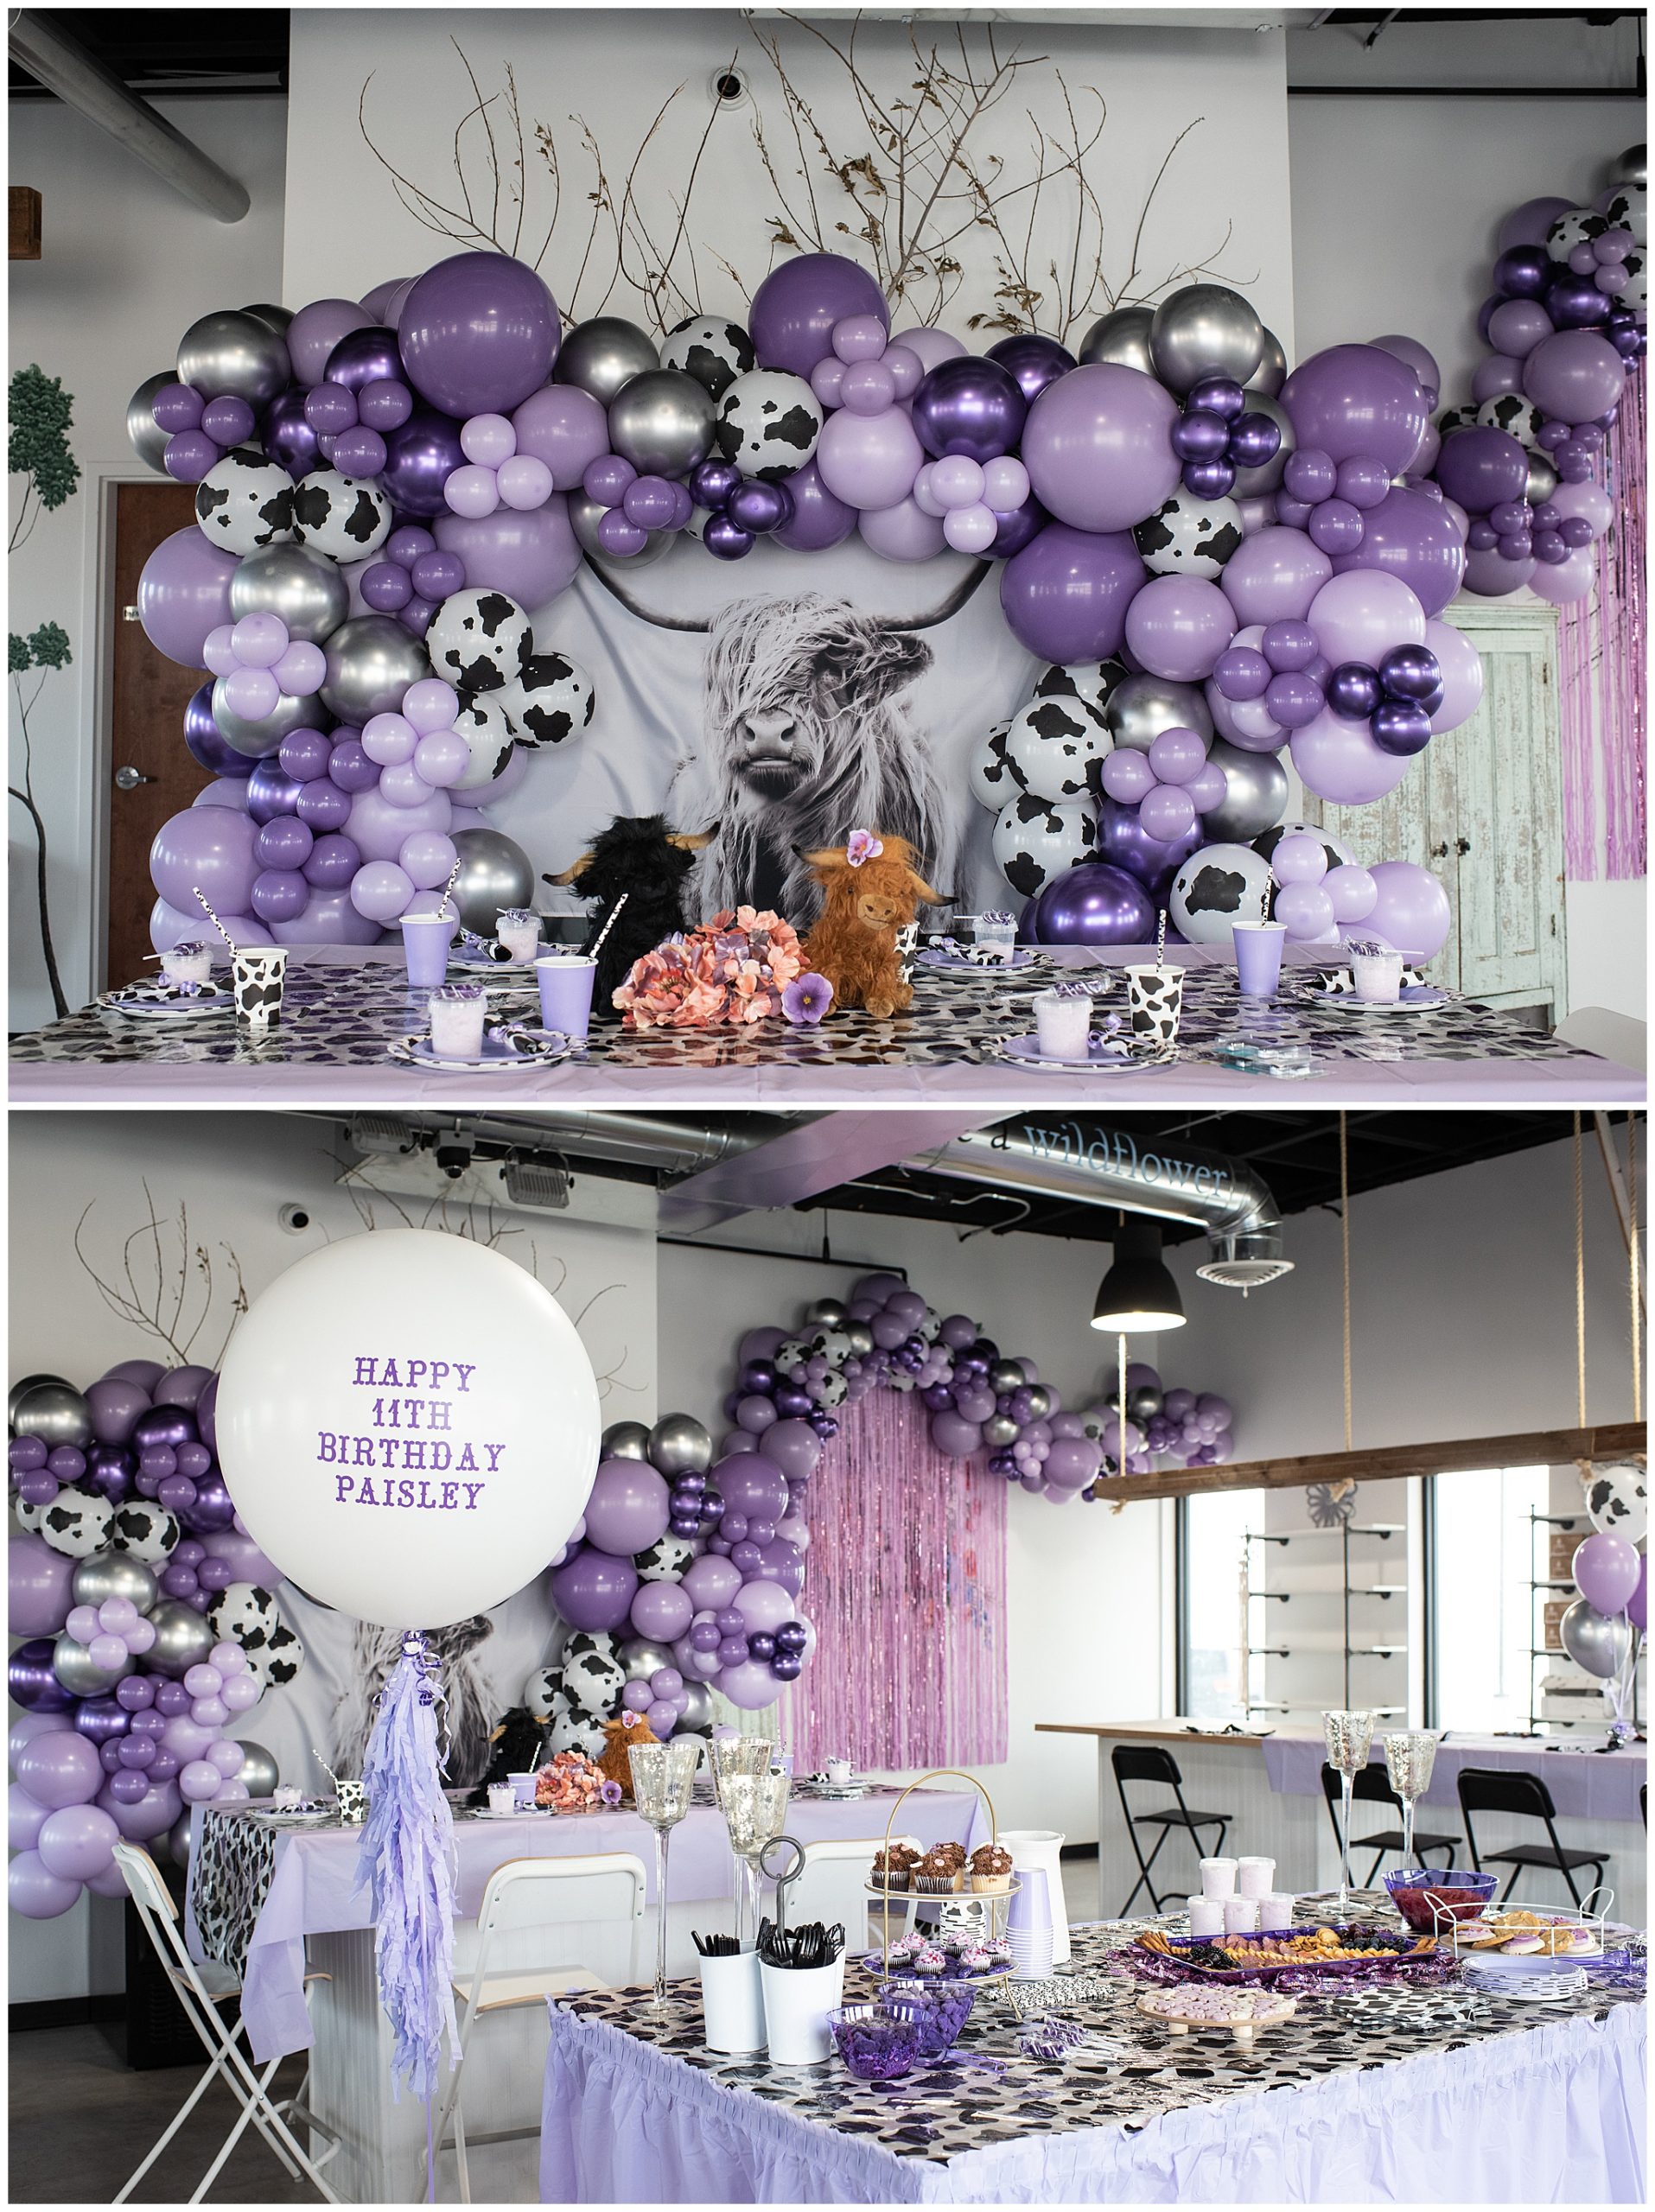 A birthday party with a purple cow theme is all decorated